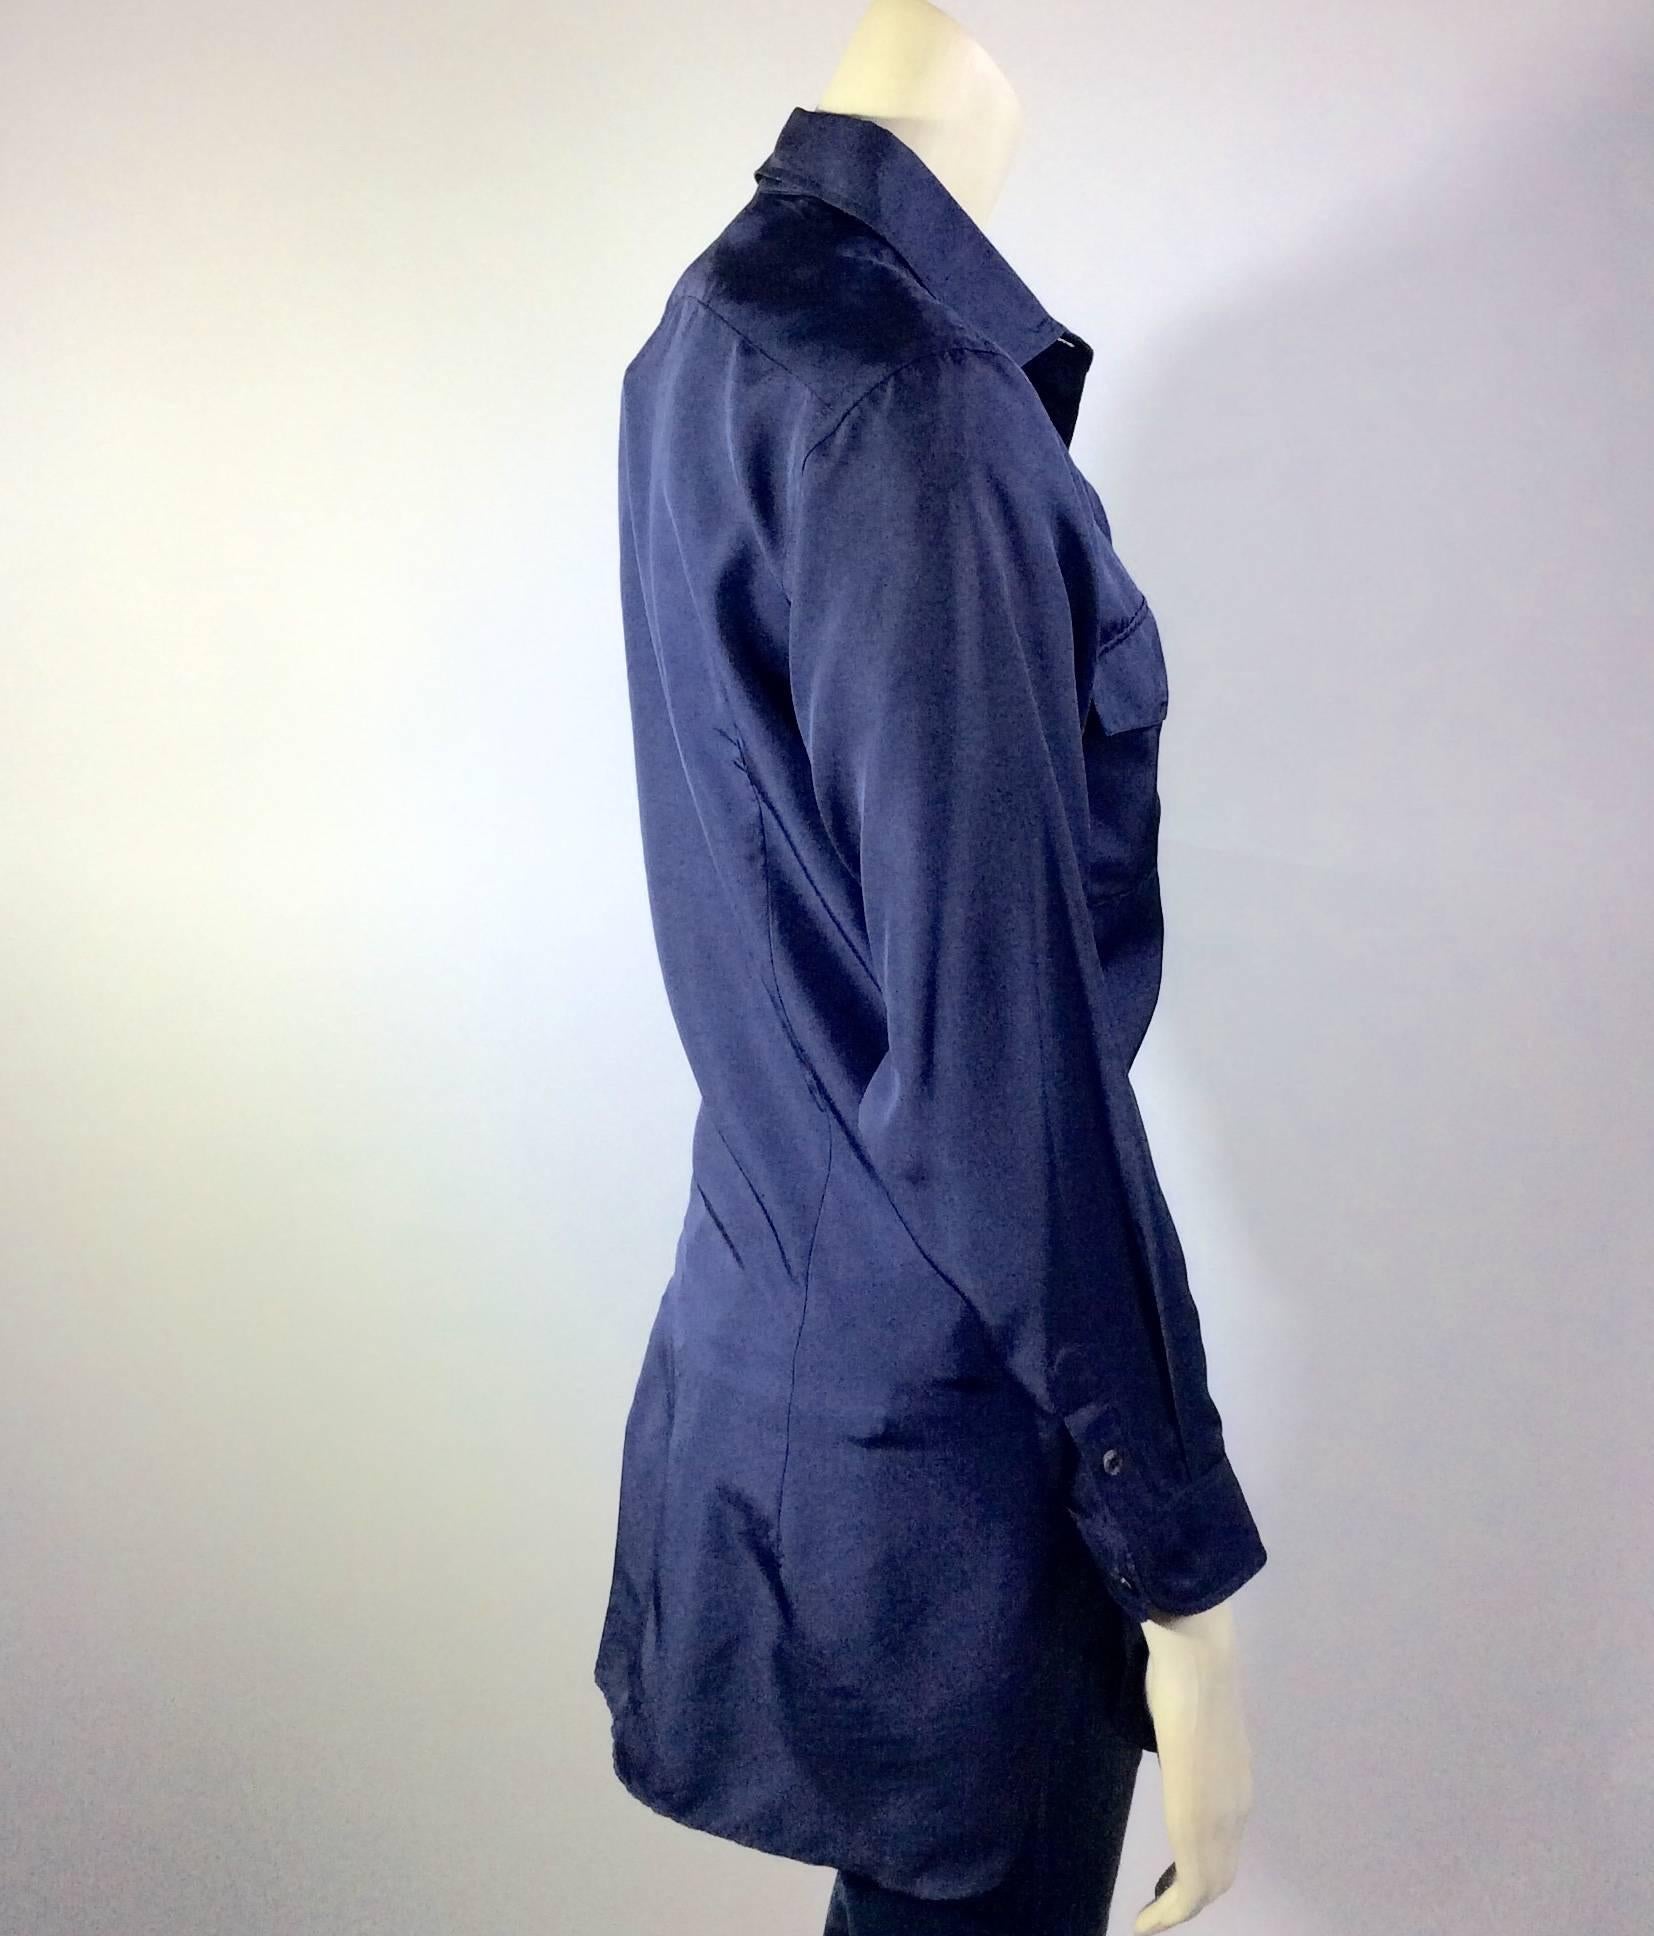 Prada Navy Drapable Button Up Blouse In Excellent Condition For Sale In Narberth, PA